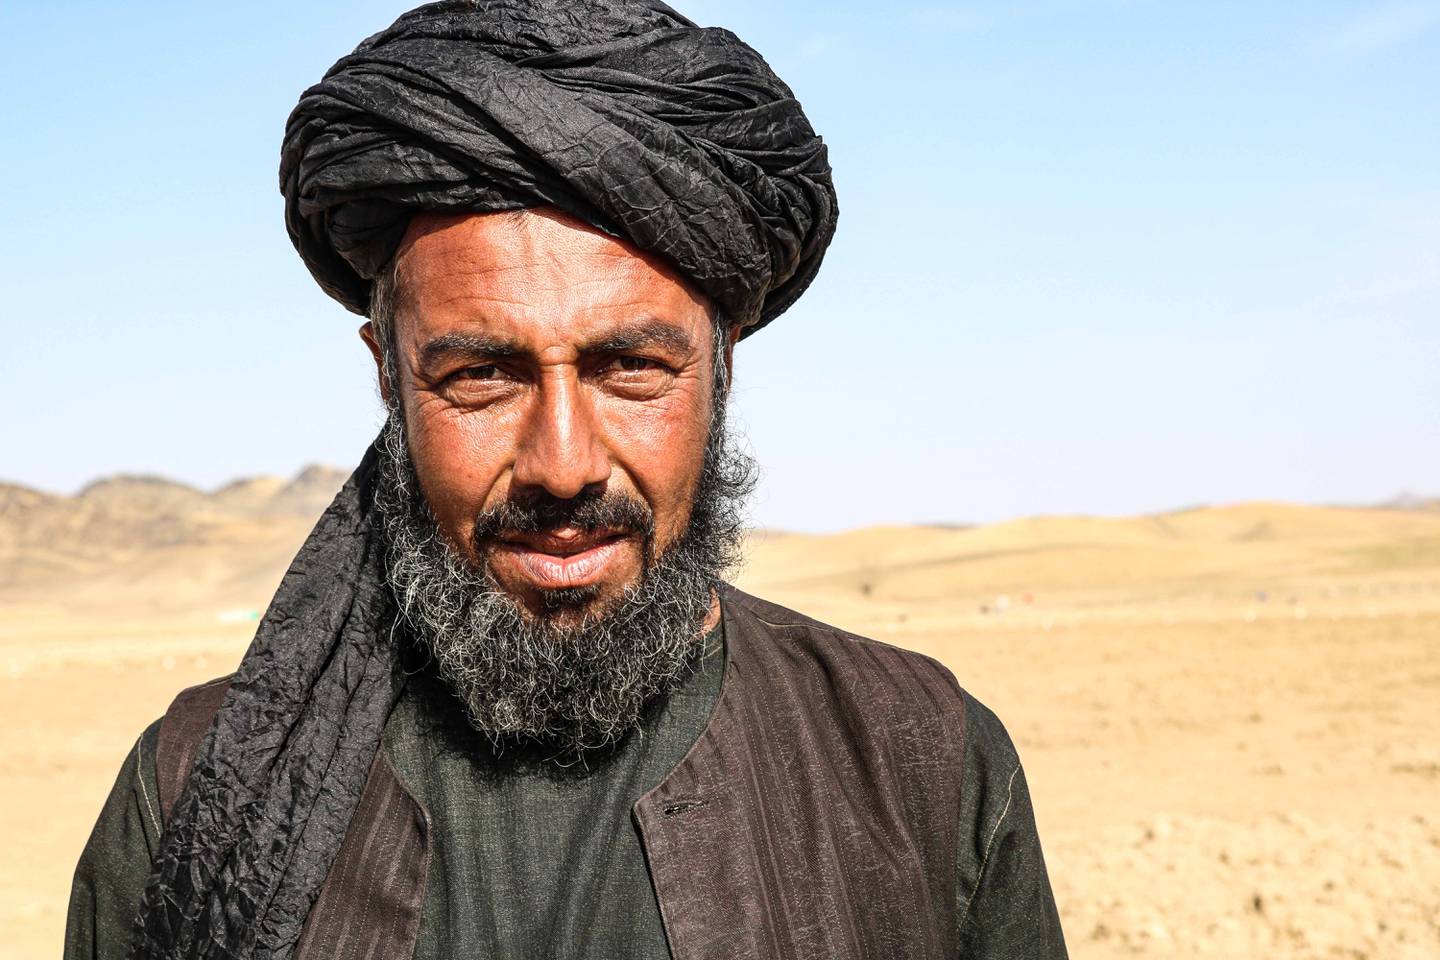 Petwayi village elder Agha Hamdullah is helpless in the face of the IED scourge. Photo: Halo Trust